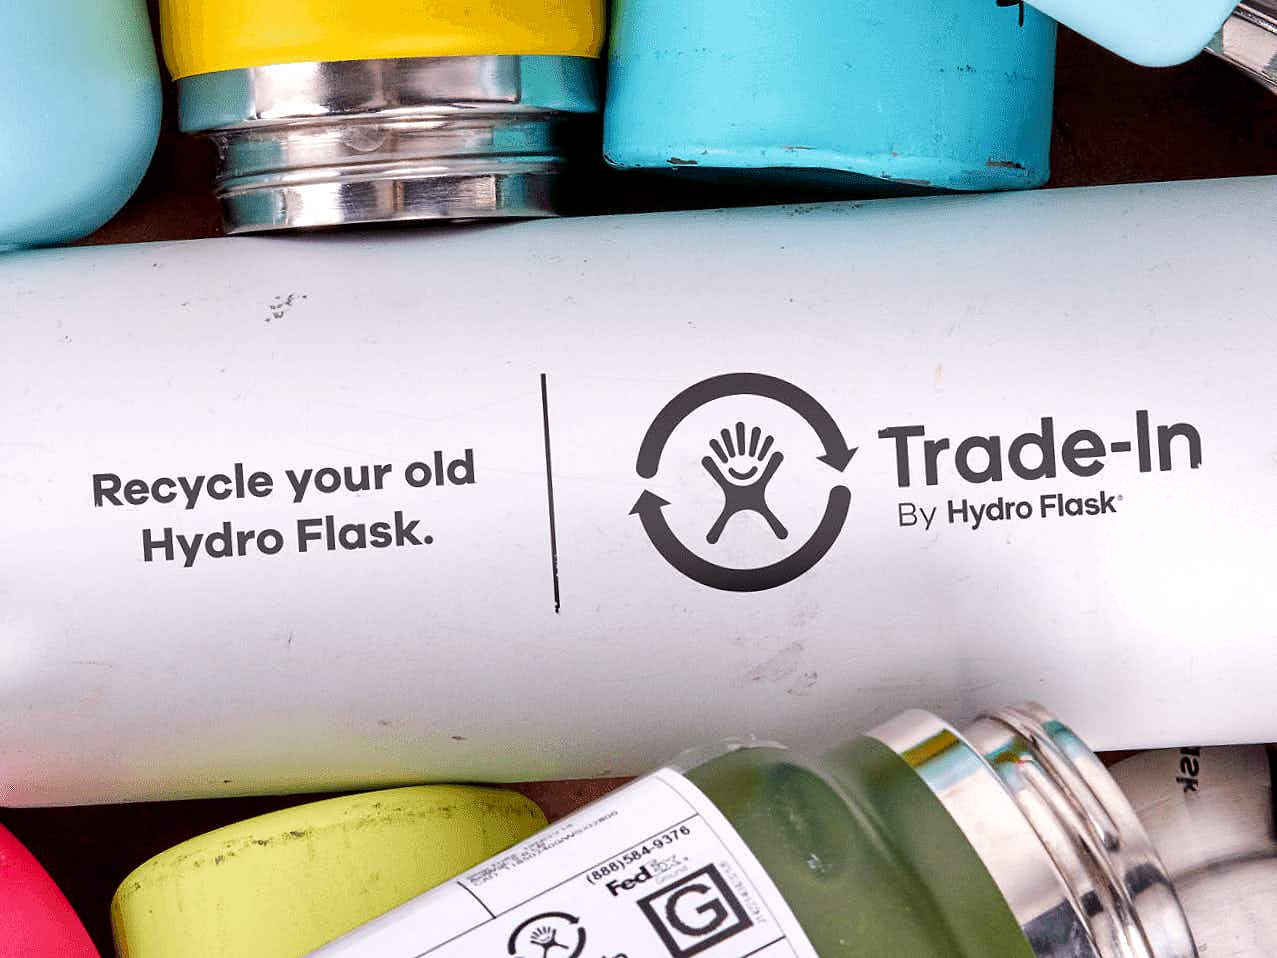 hydro flask recycling trade-in program details on pile of bottles